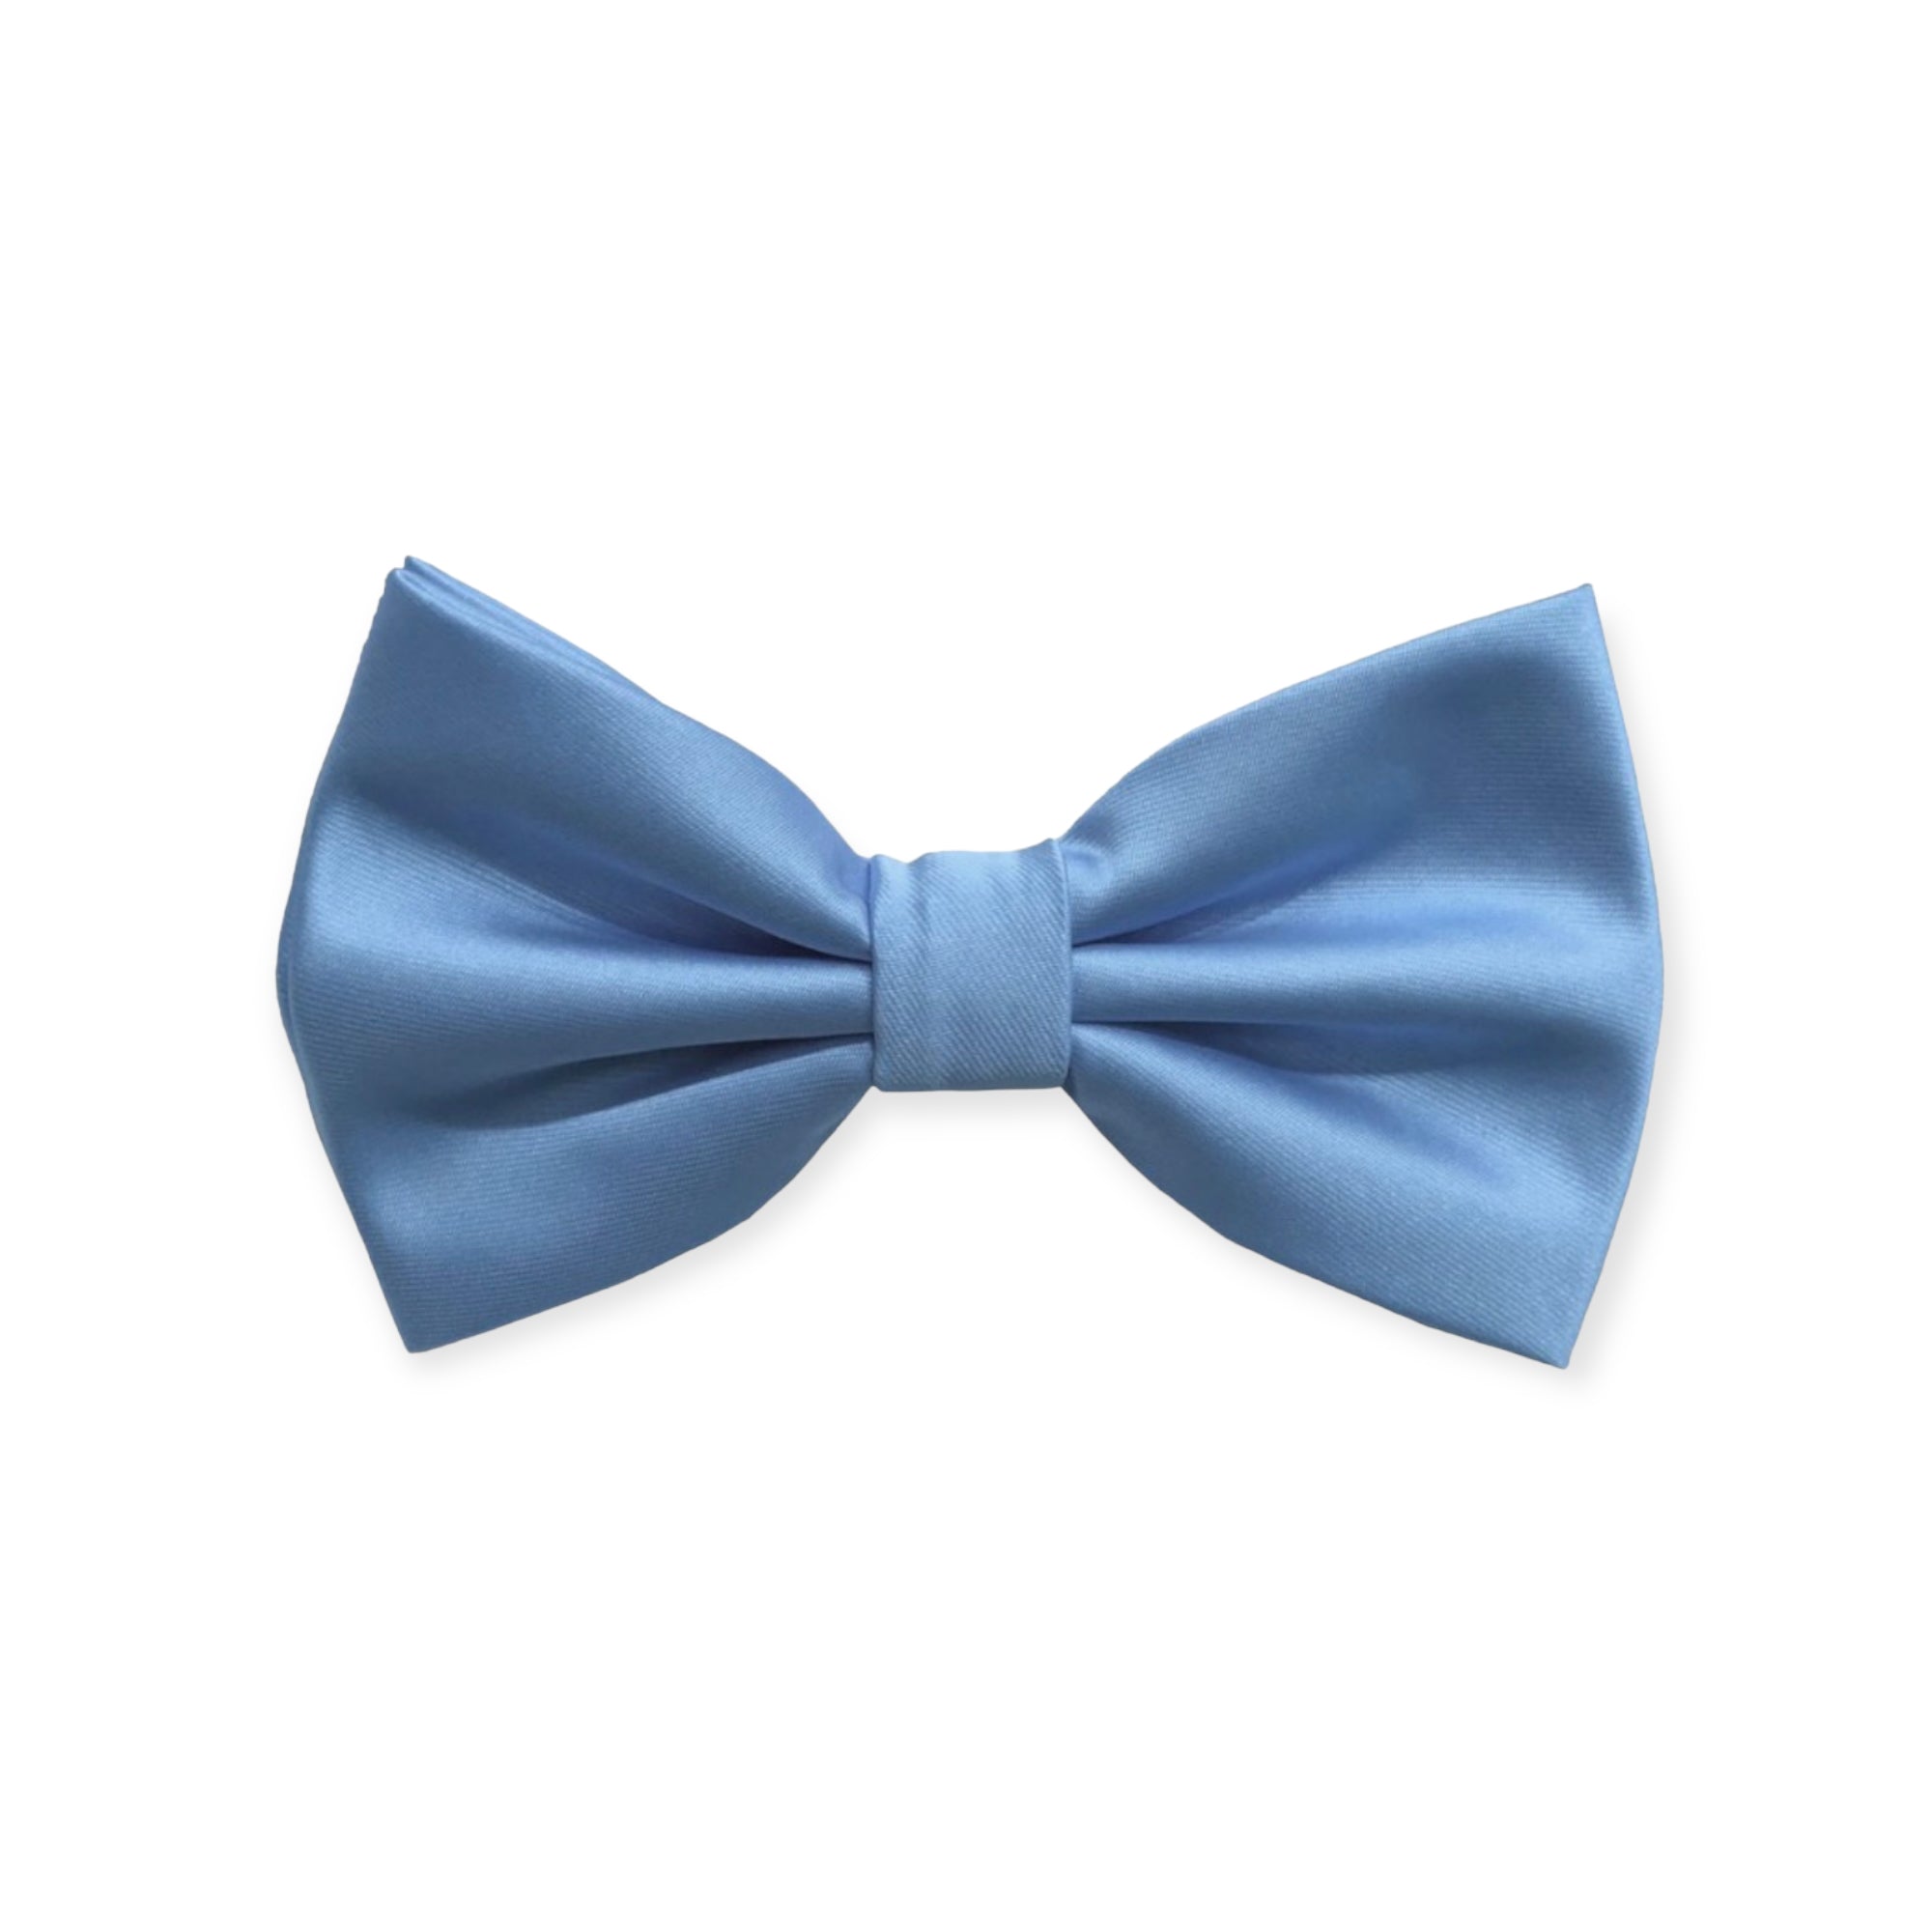 Solid Lt. Blue Bow Tie and Hanky